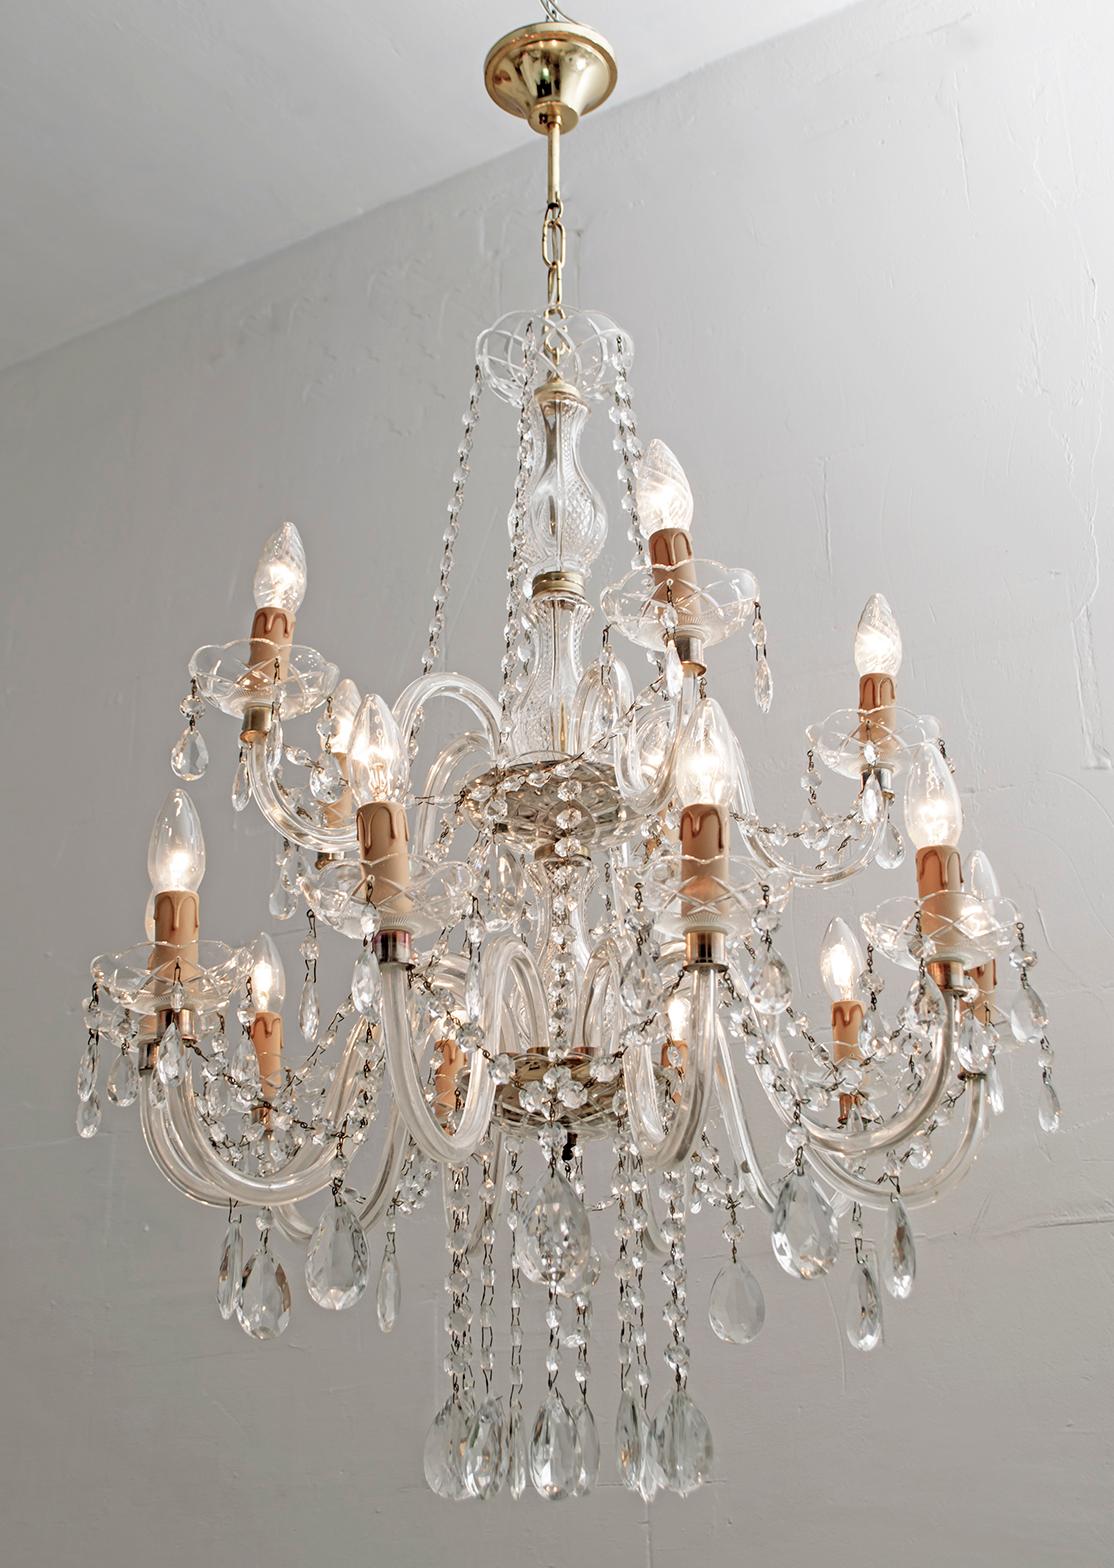 A delightful 15-light Maria Theresa chandelier in Italian crystal and gilded metal with serpentine arms, each candle light with hanging pendants and decorative bobeches.